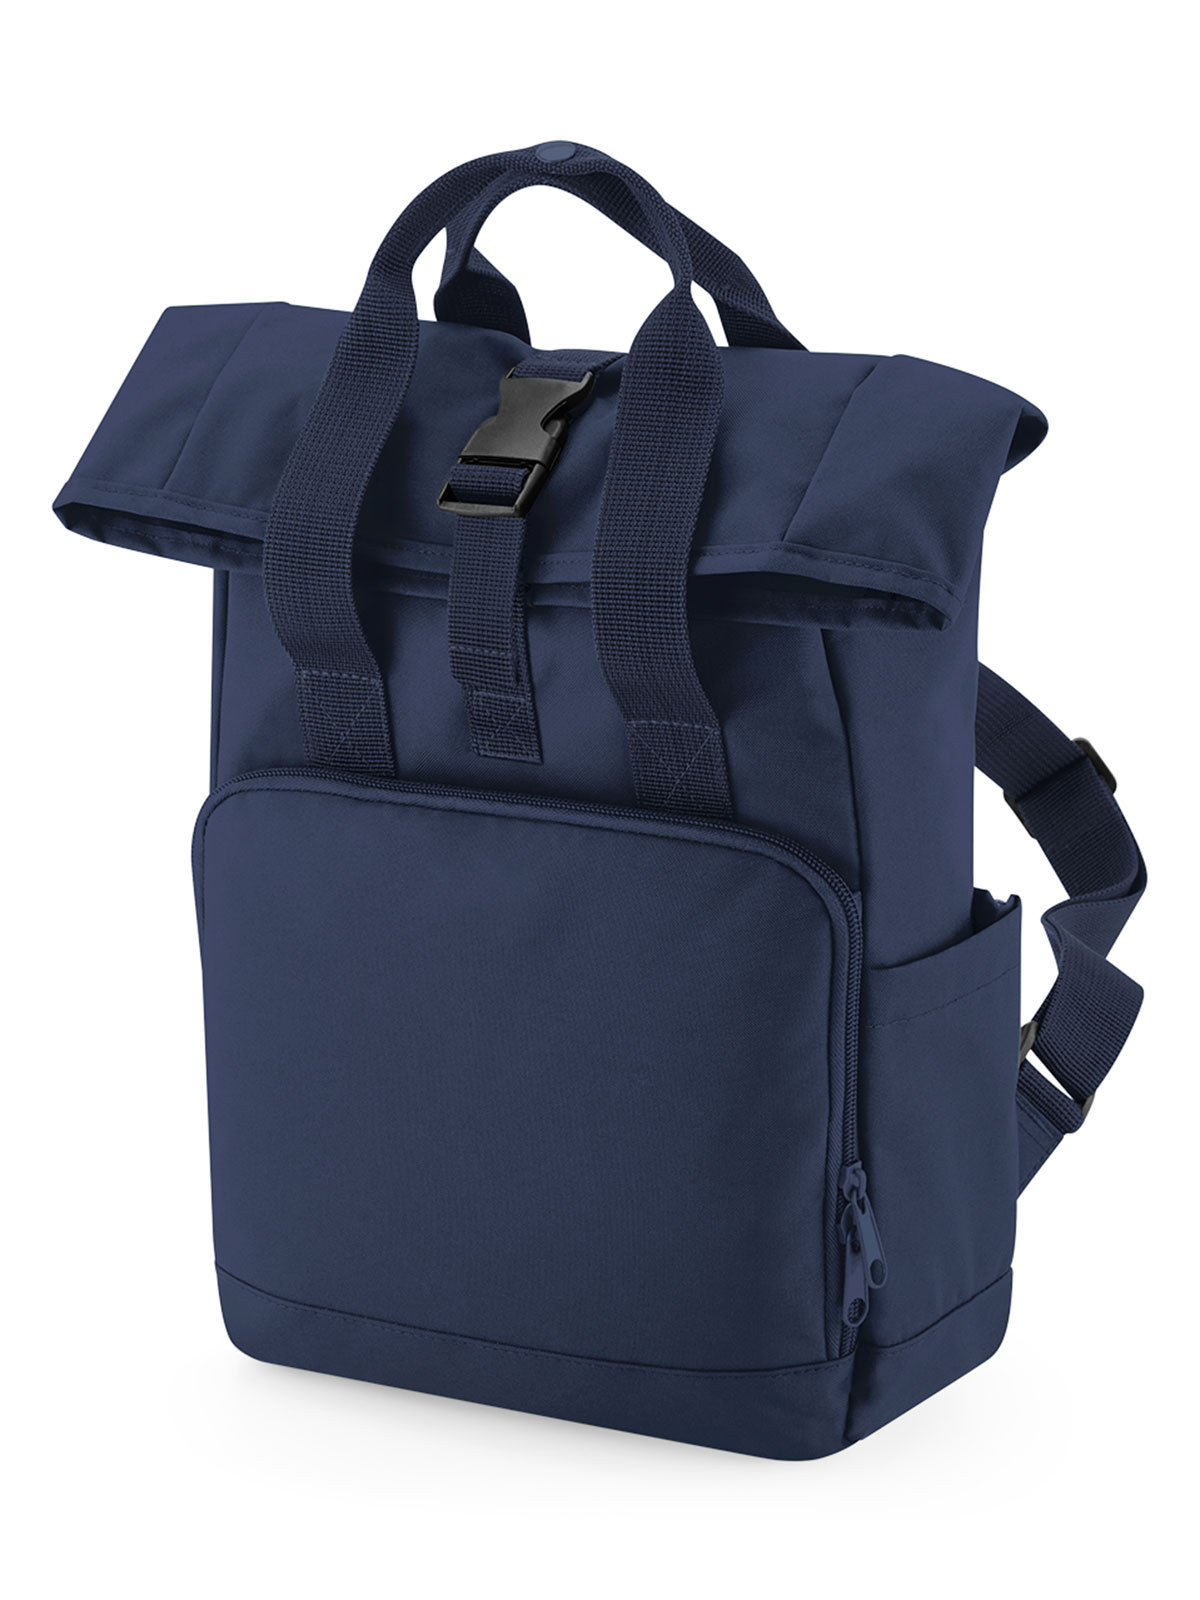 recycled-mini-twin-handle-roll-top-backpack-navy-dusk.webp